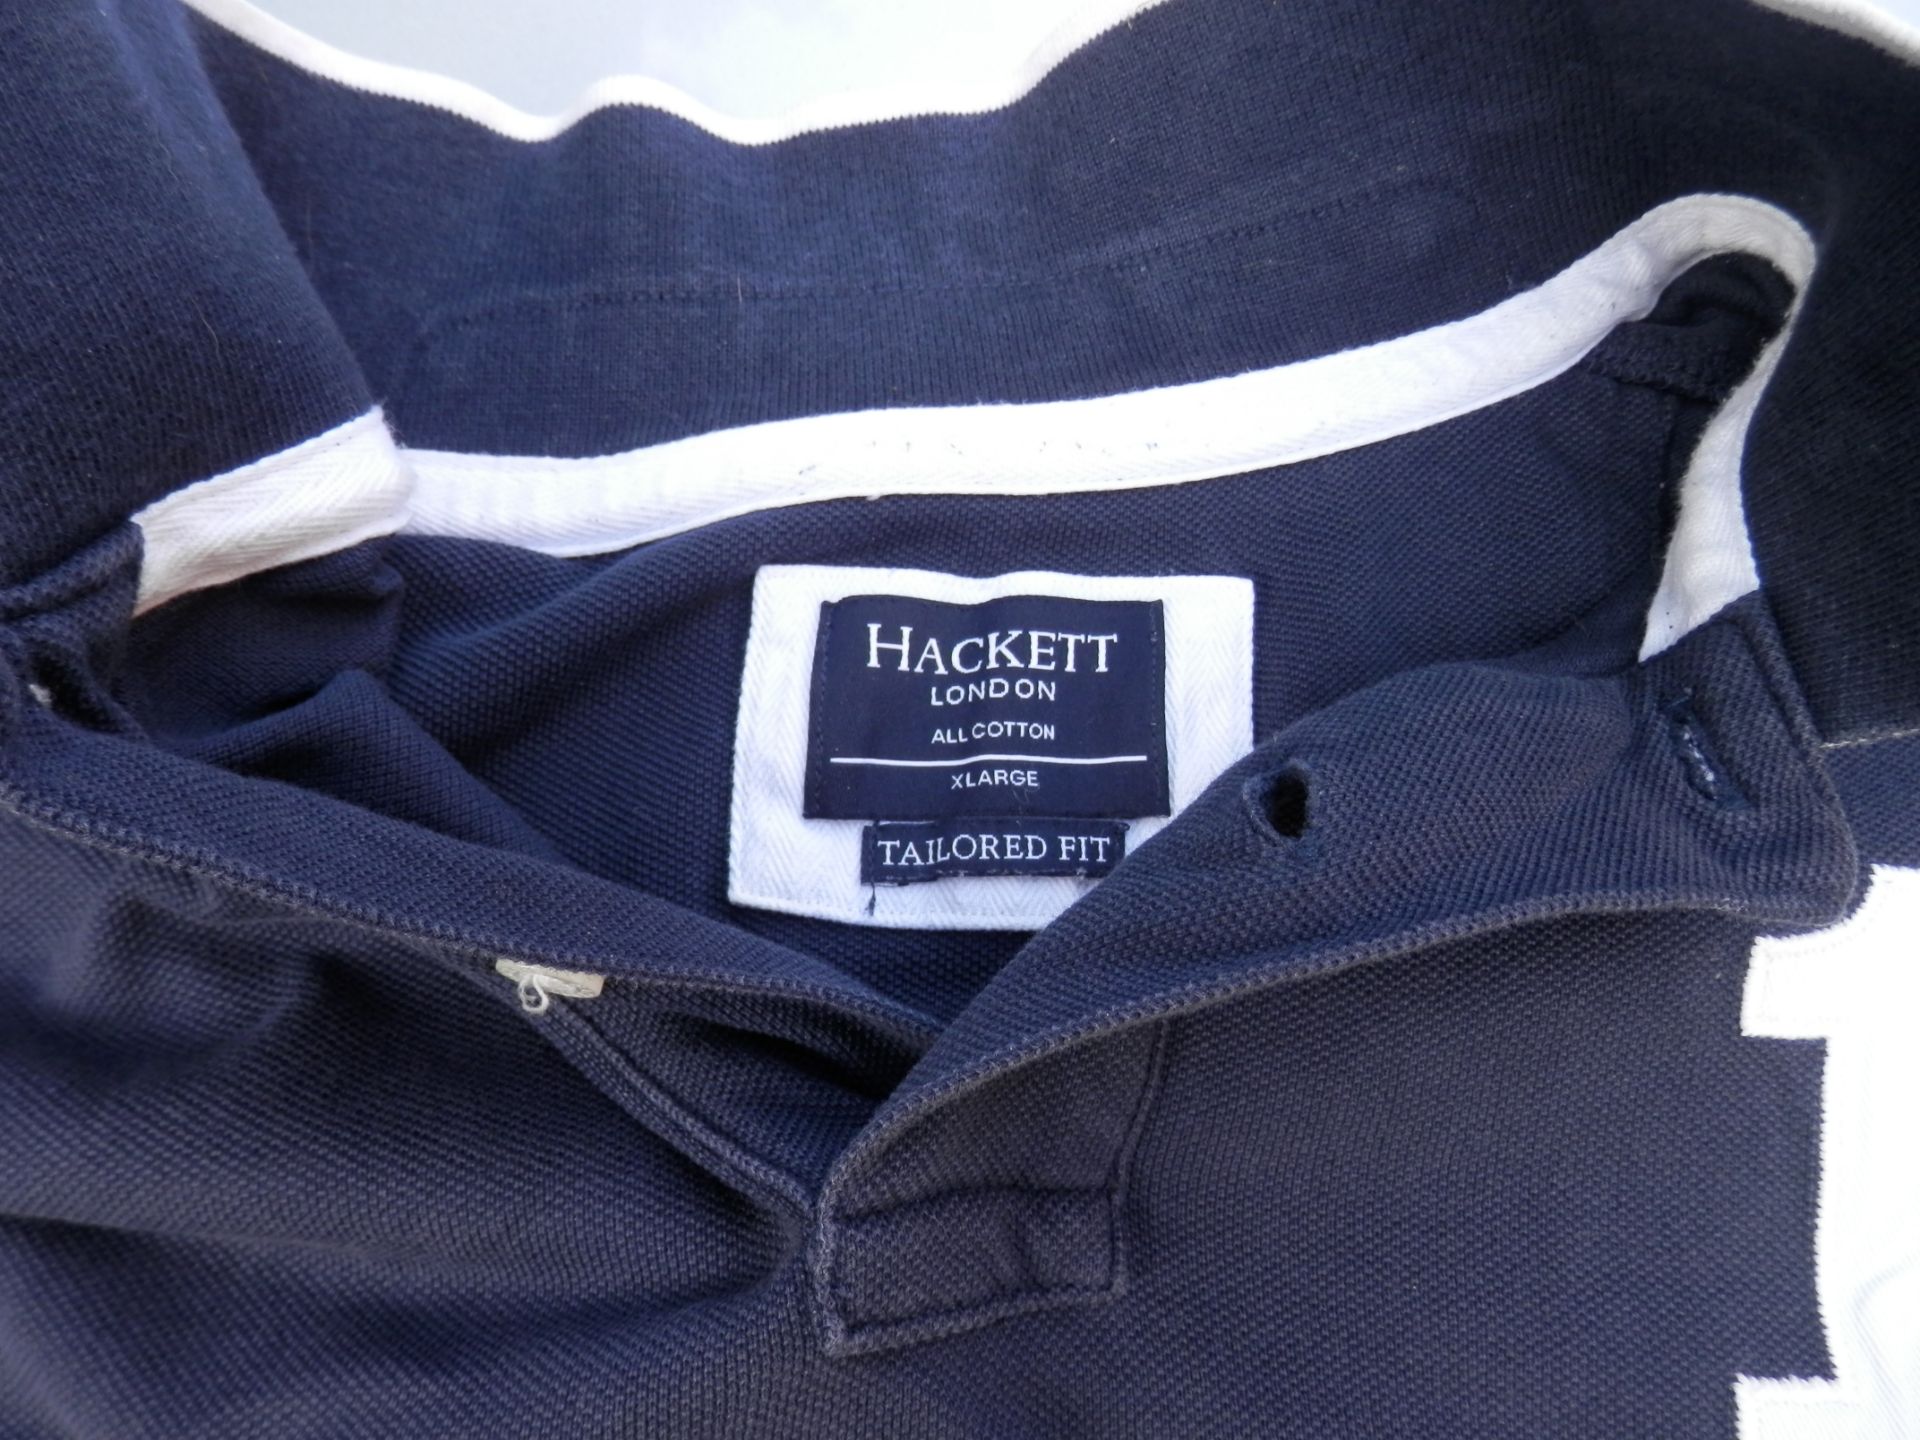 GENTS USED HACKETT POLO SHIRT IN XL, BLUE & WHITE, NO1. USED CONDITION. - Image 2 of 6